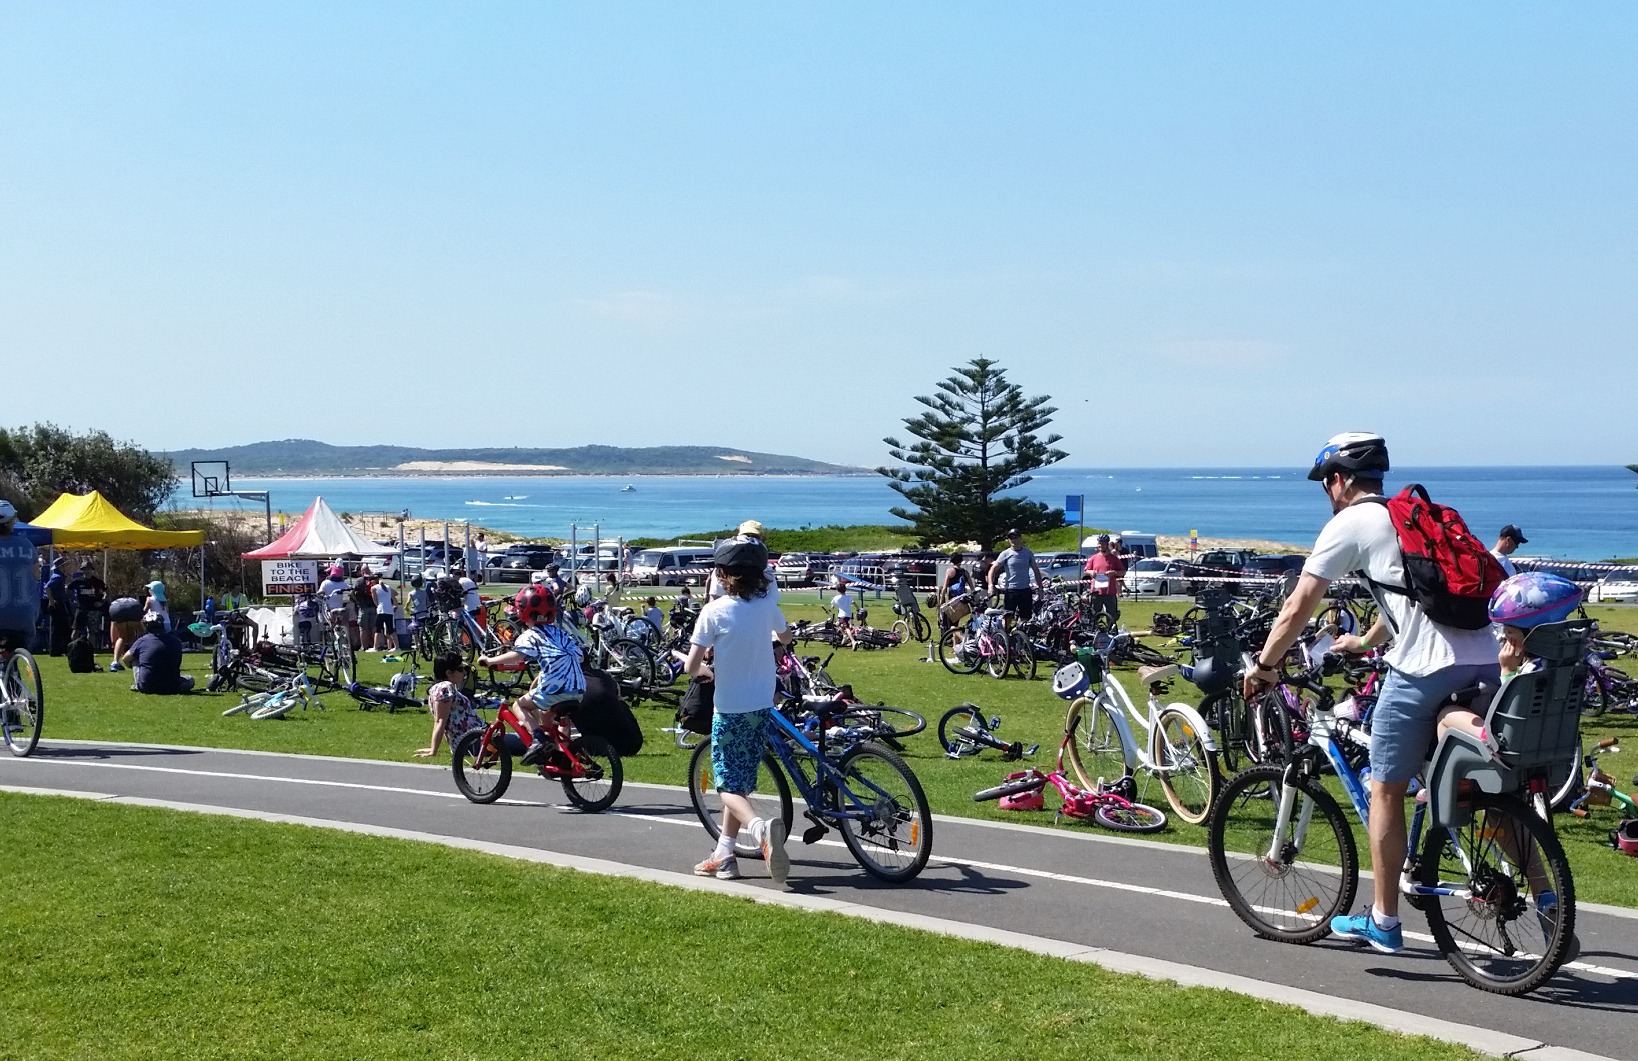 7km bicycle ride from Taren Point Shorebird Reserve to Don Lucas Reserve, Cronulla.